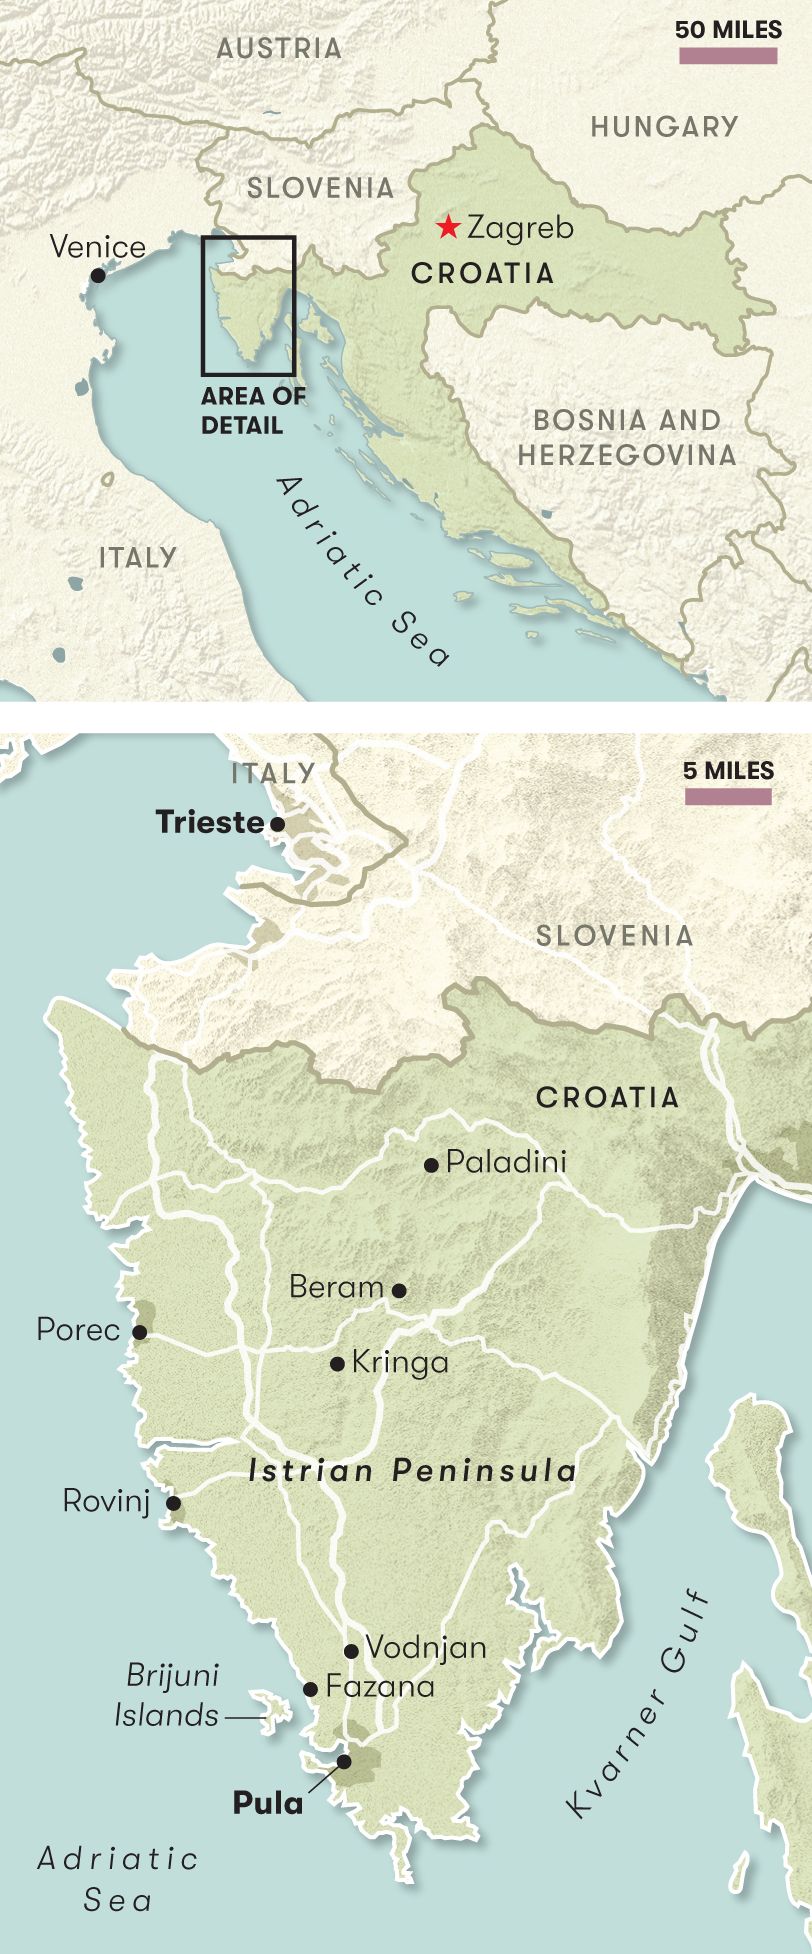 In Istria, Roman Ruins, Unique Wines, and Prized Truffles Await